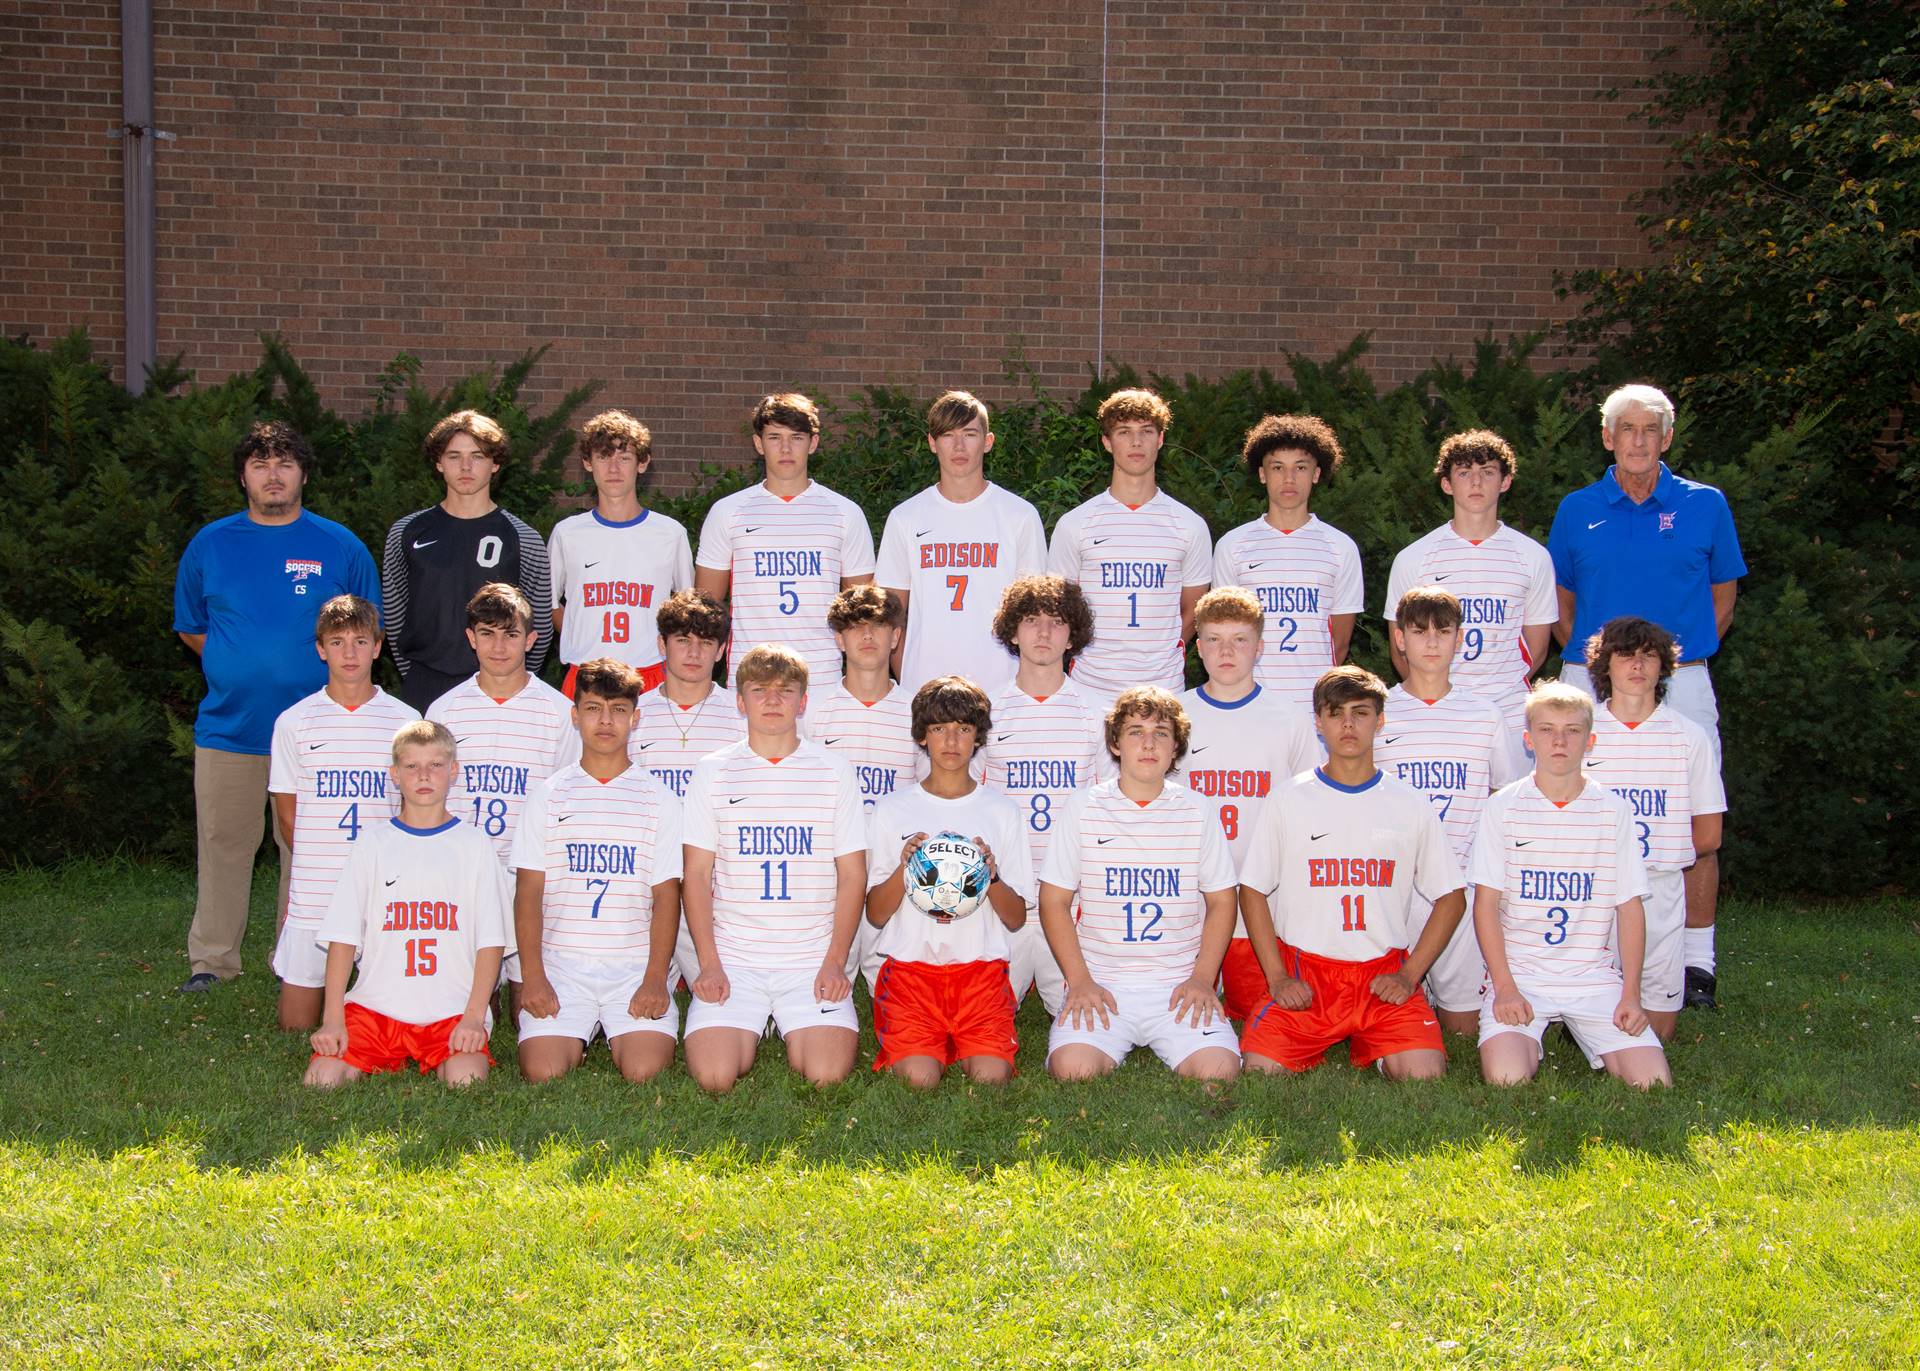 Charger Soccer Team